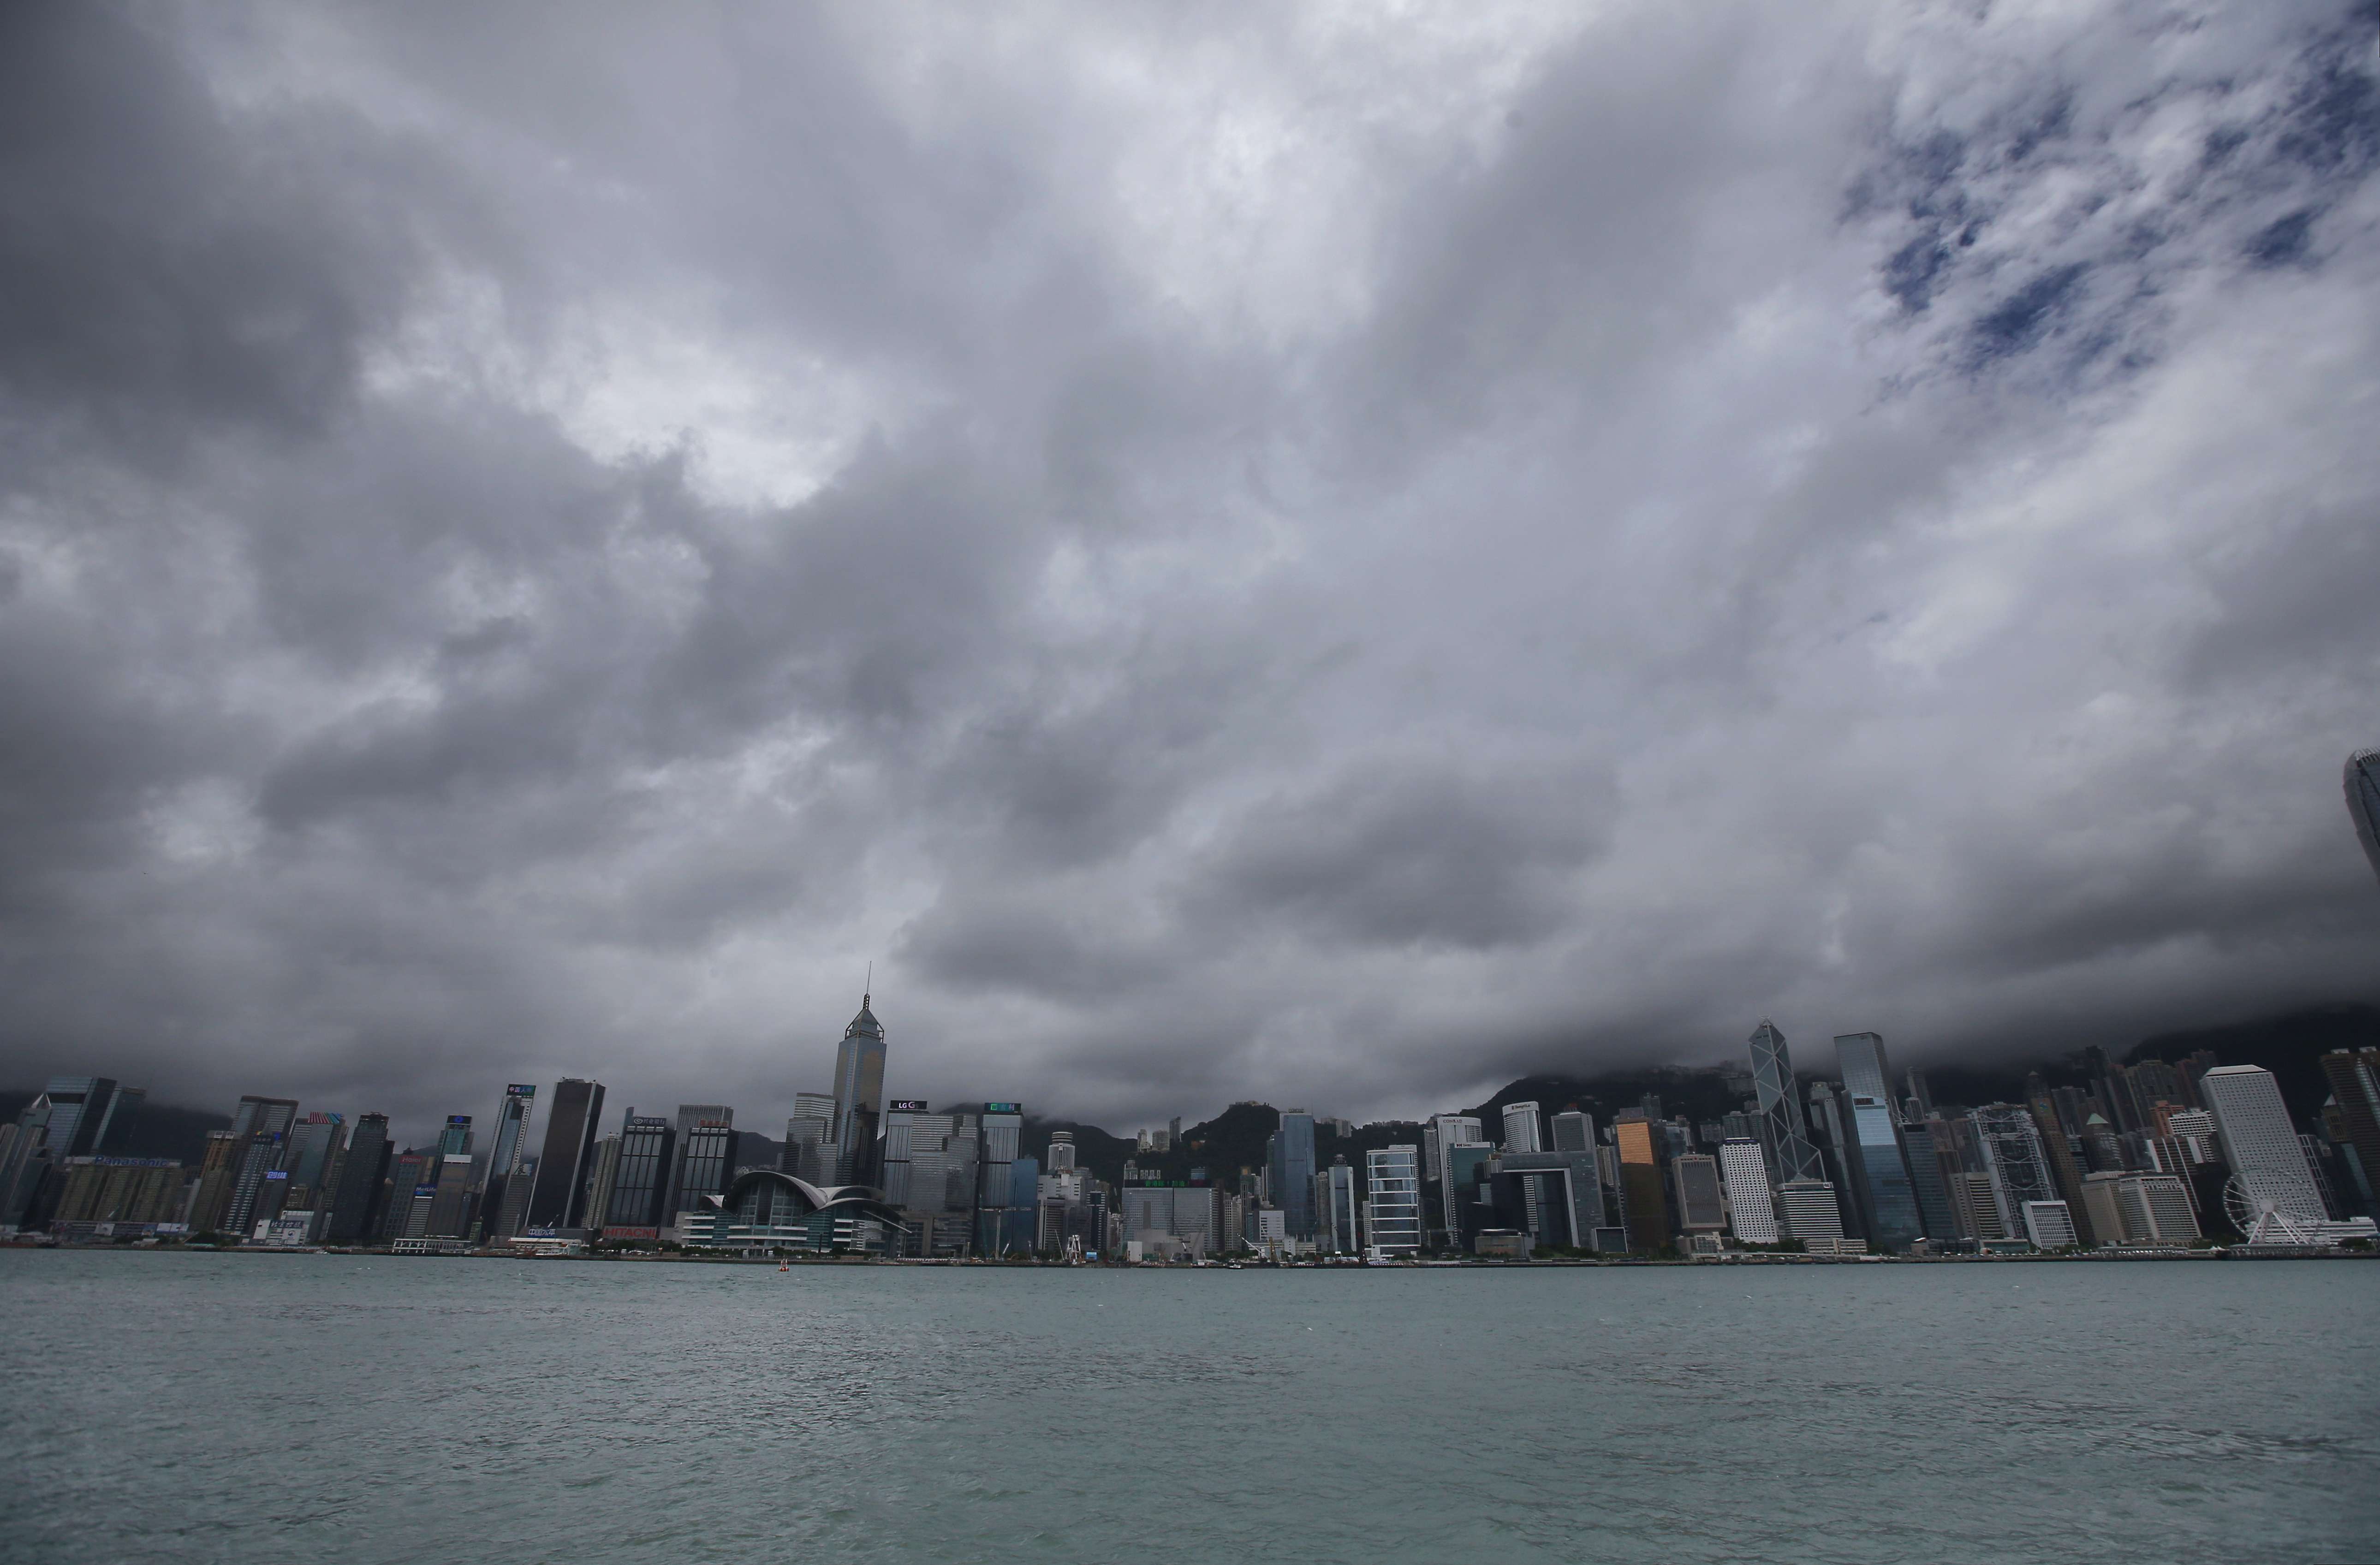 Beijing academics say Chinese leaders did not expect the stormy times experienced by Hong Kong. Photo: Dickson Lee